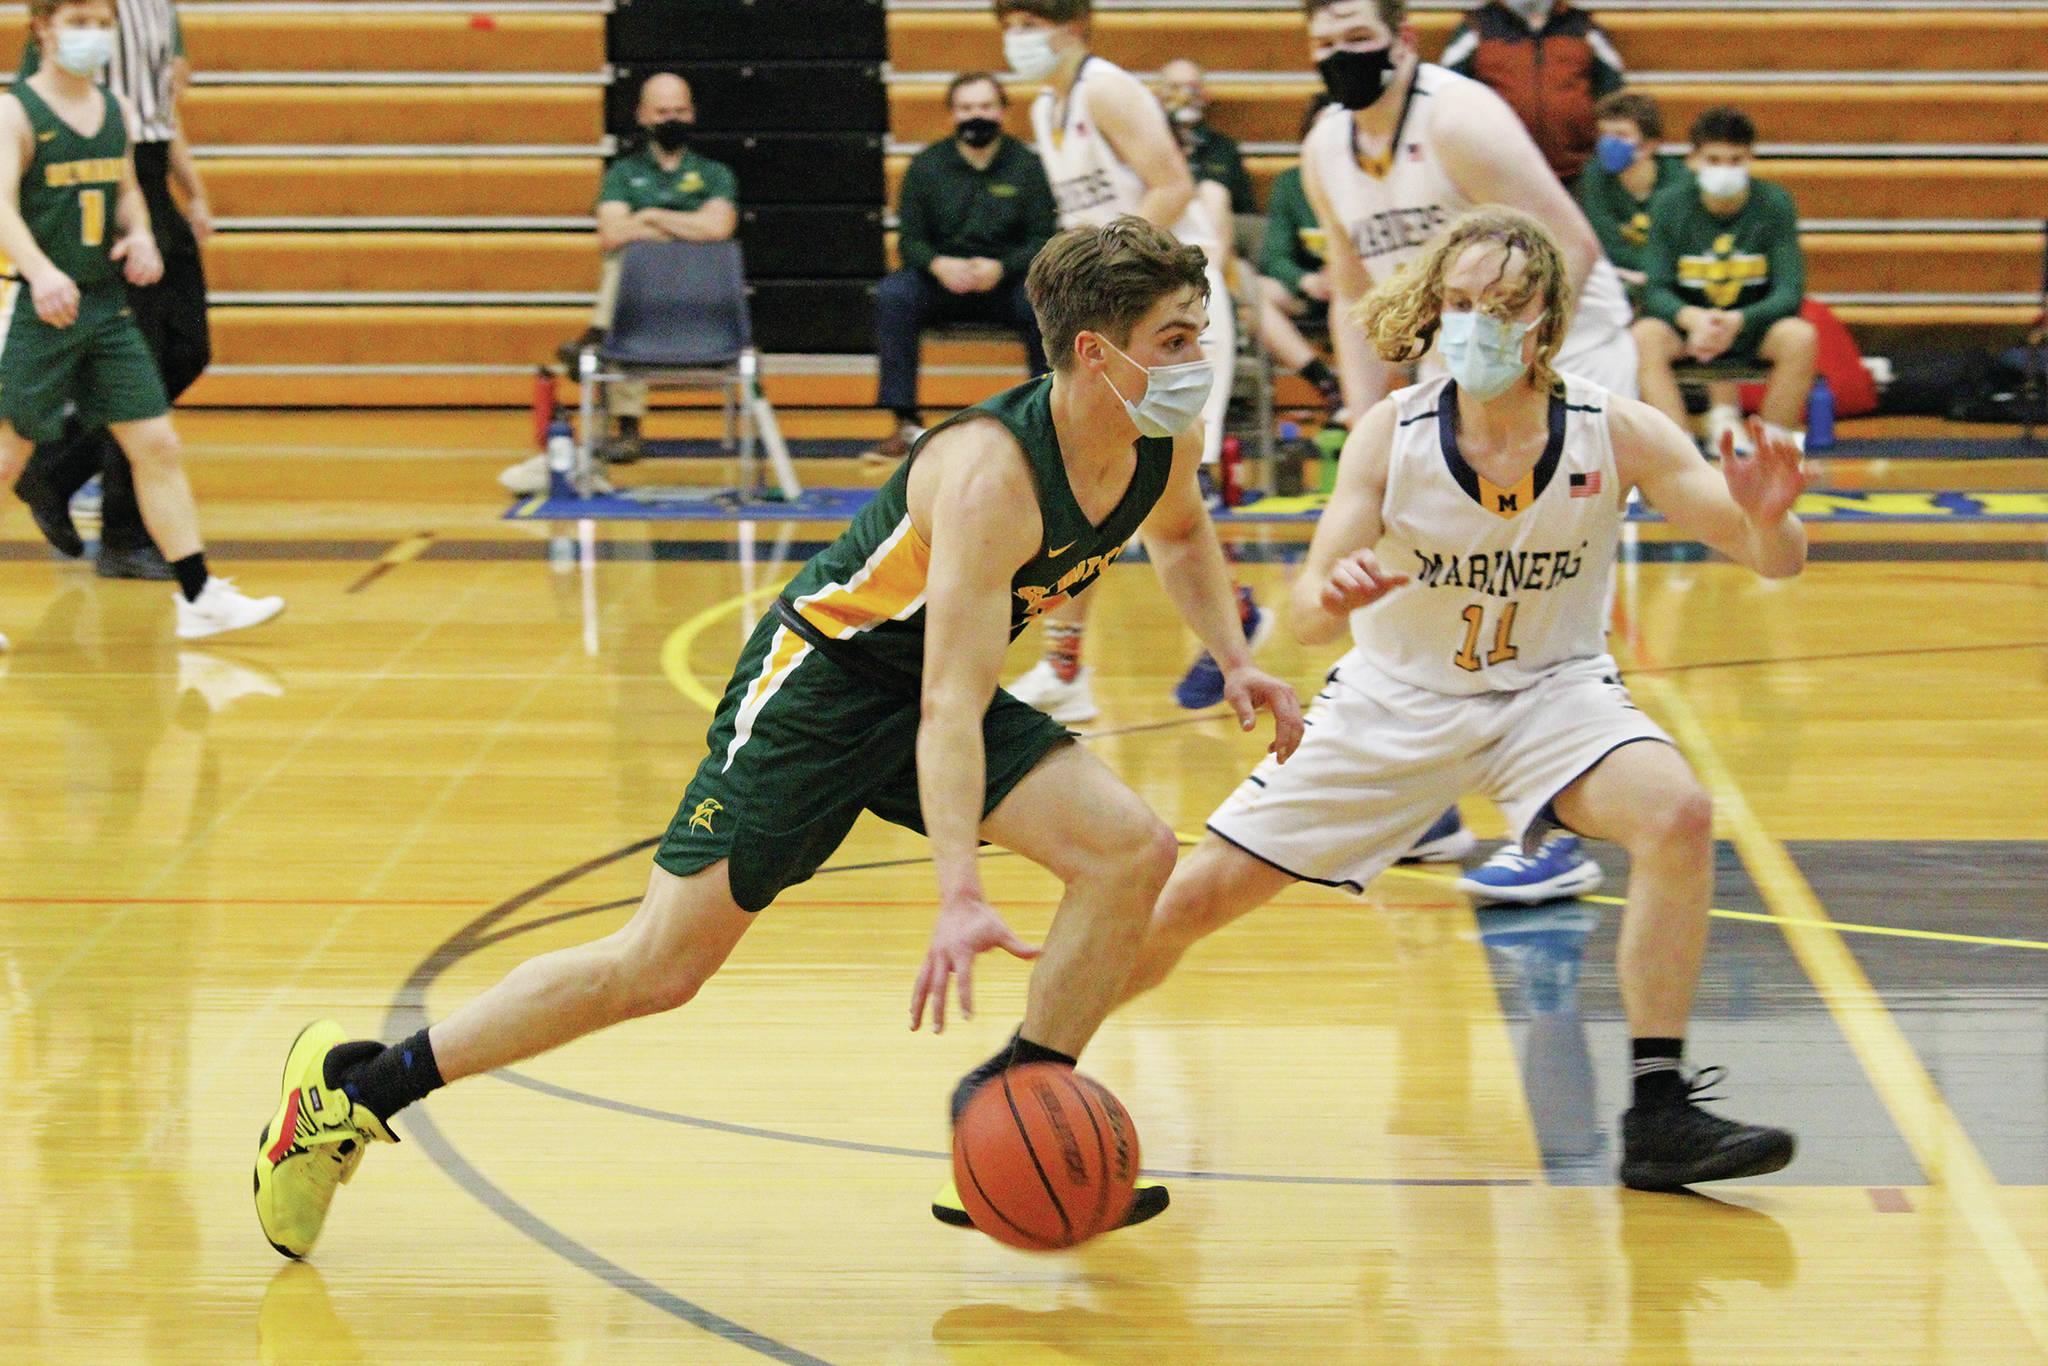 Seward’s Max Pfeiffenberger makes a move past Homer’s Parker Lowney during a Saturday, Jan. 30, 2021 basketball game at the Alice Witte Gymnasium in Homer, Alaska. (Photo by Megan Pacer/Homer News)